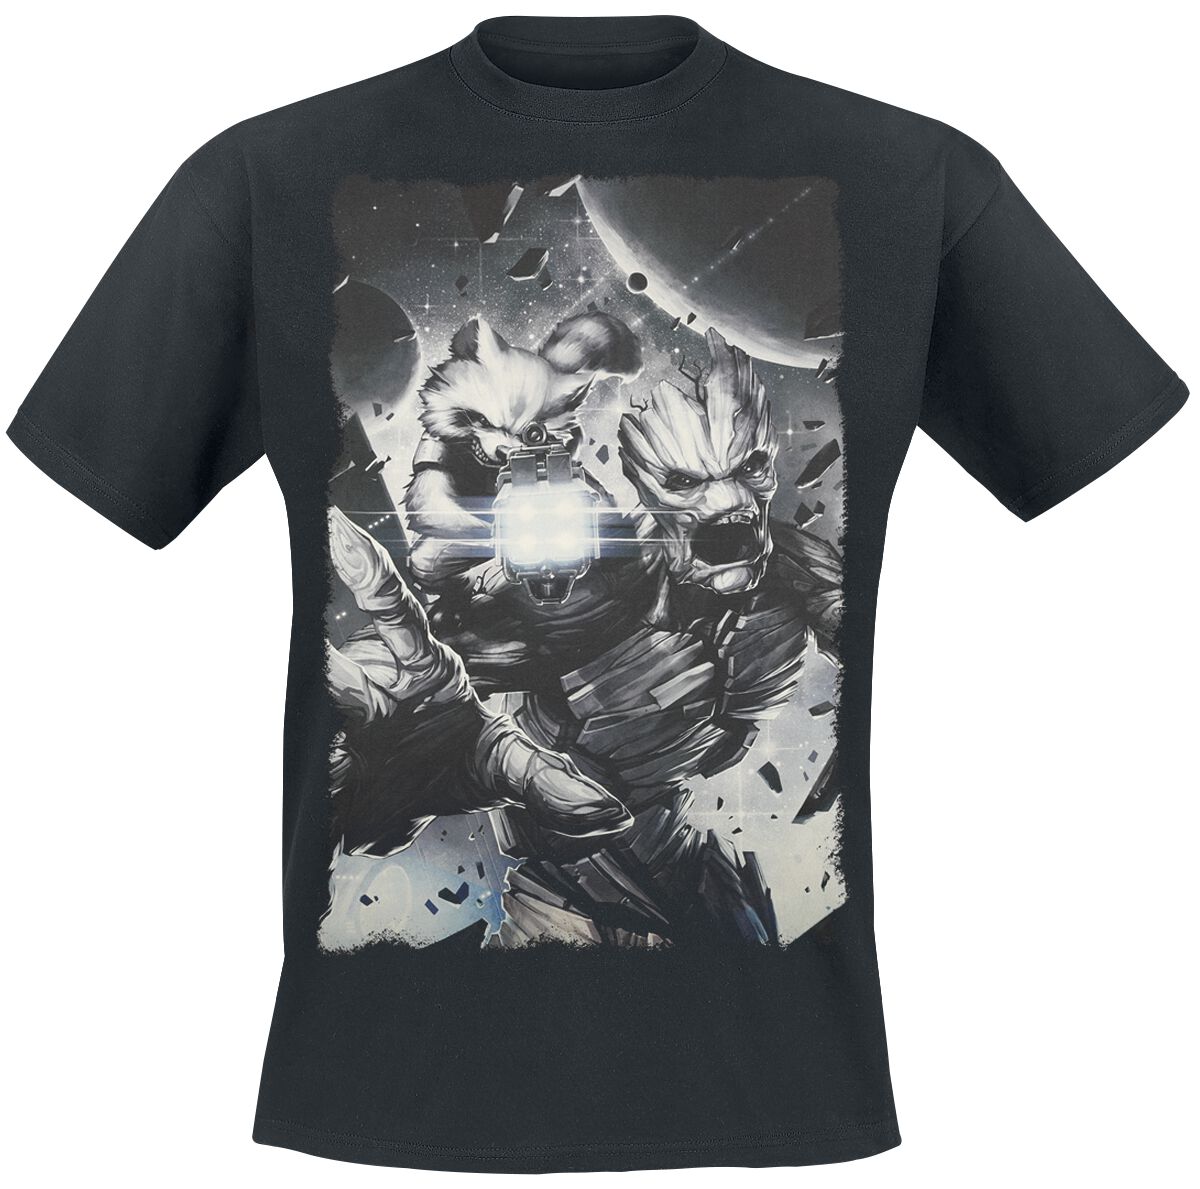 Guardians Of The Galaxy Groot And Rocket T-Shirt schwarz in XL von Guardians Of The Galaxy